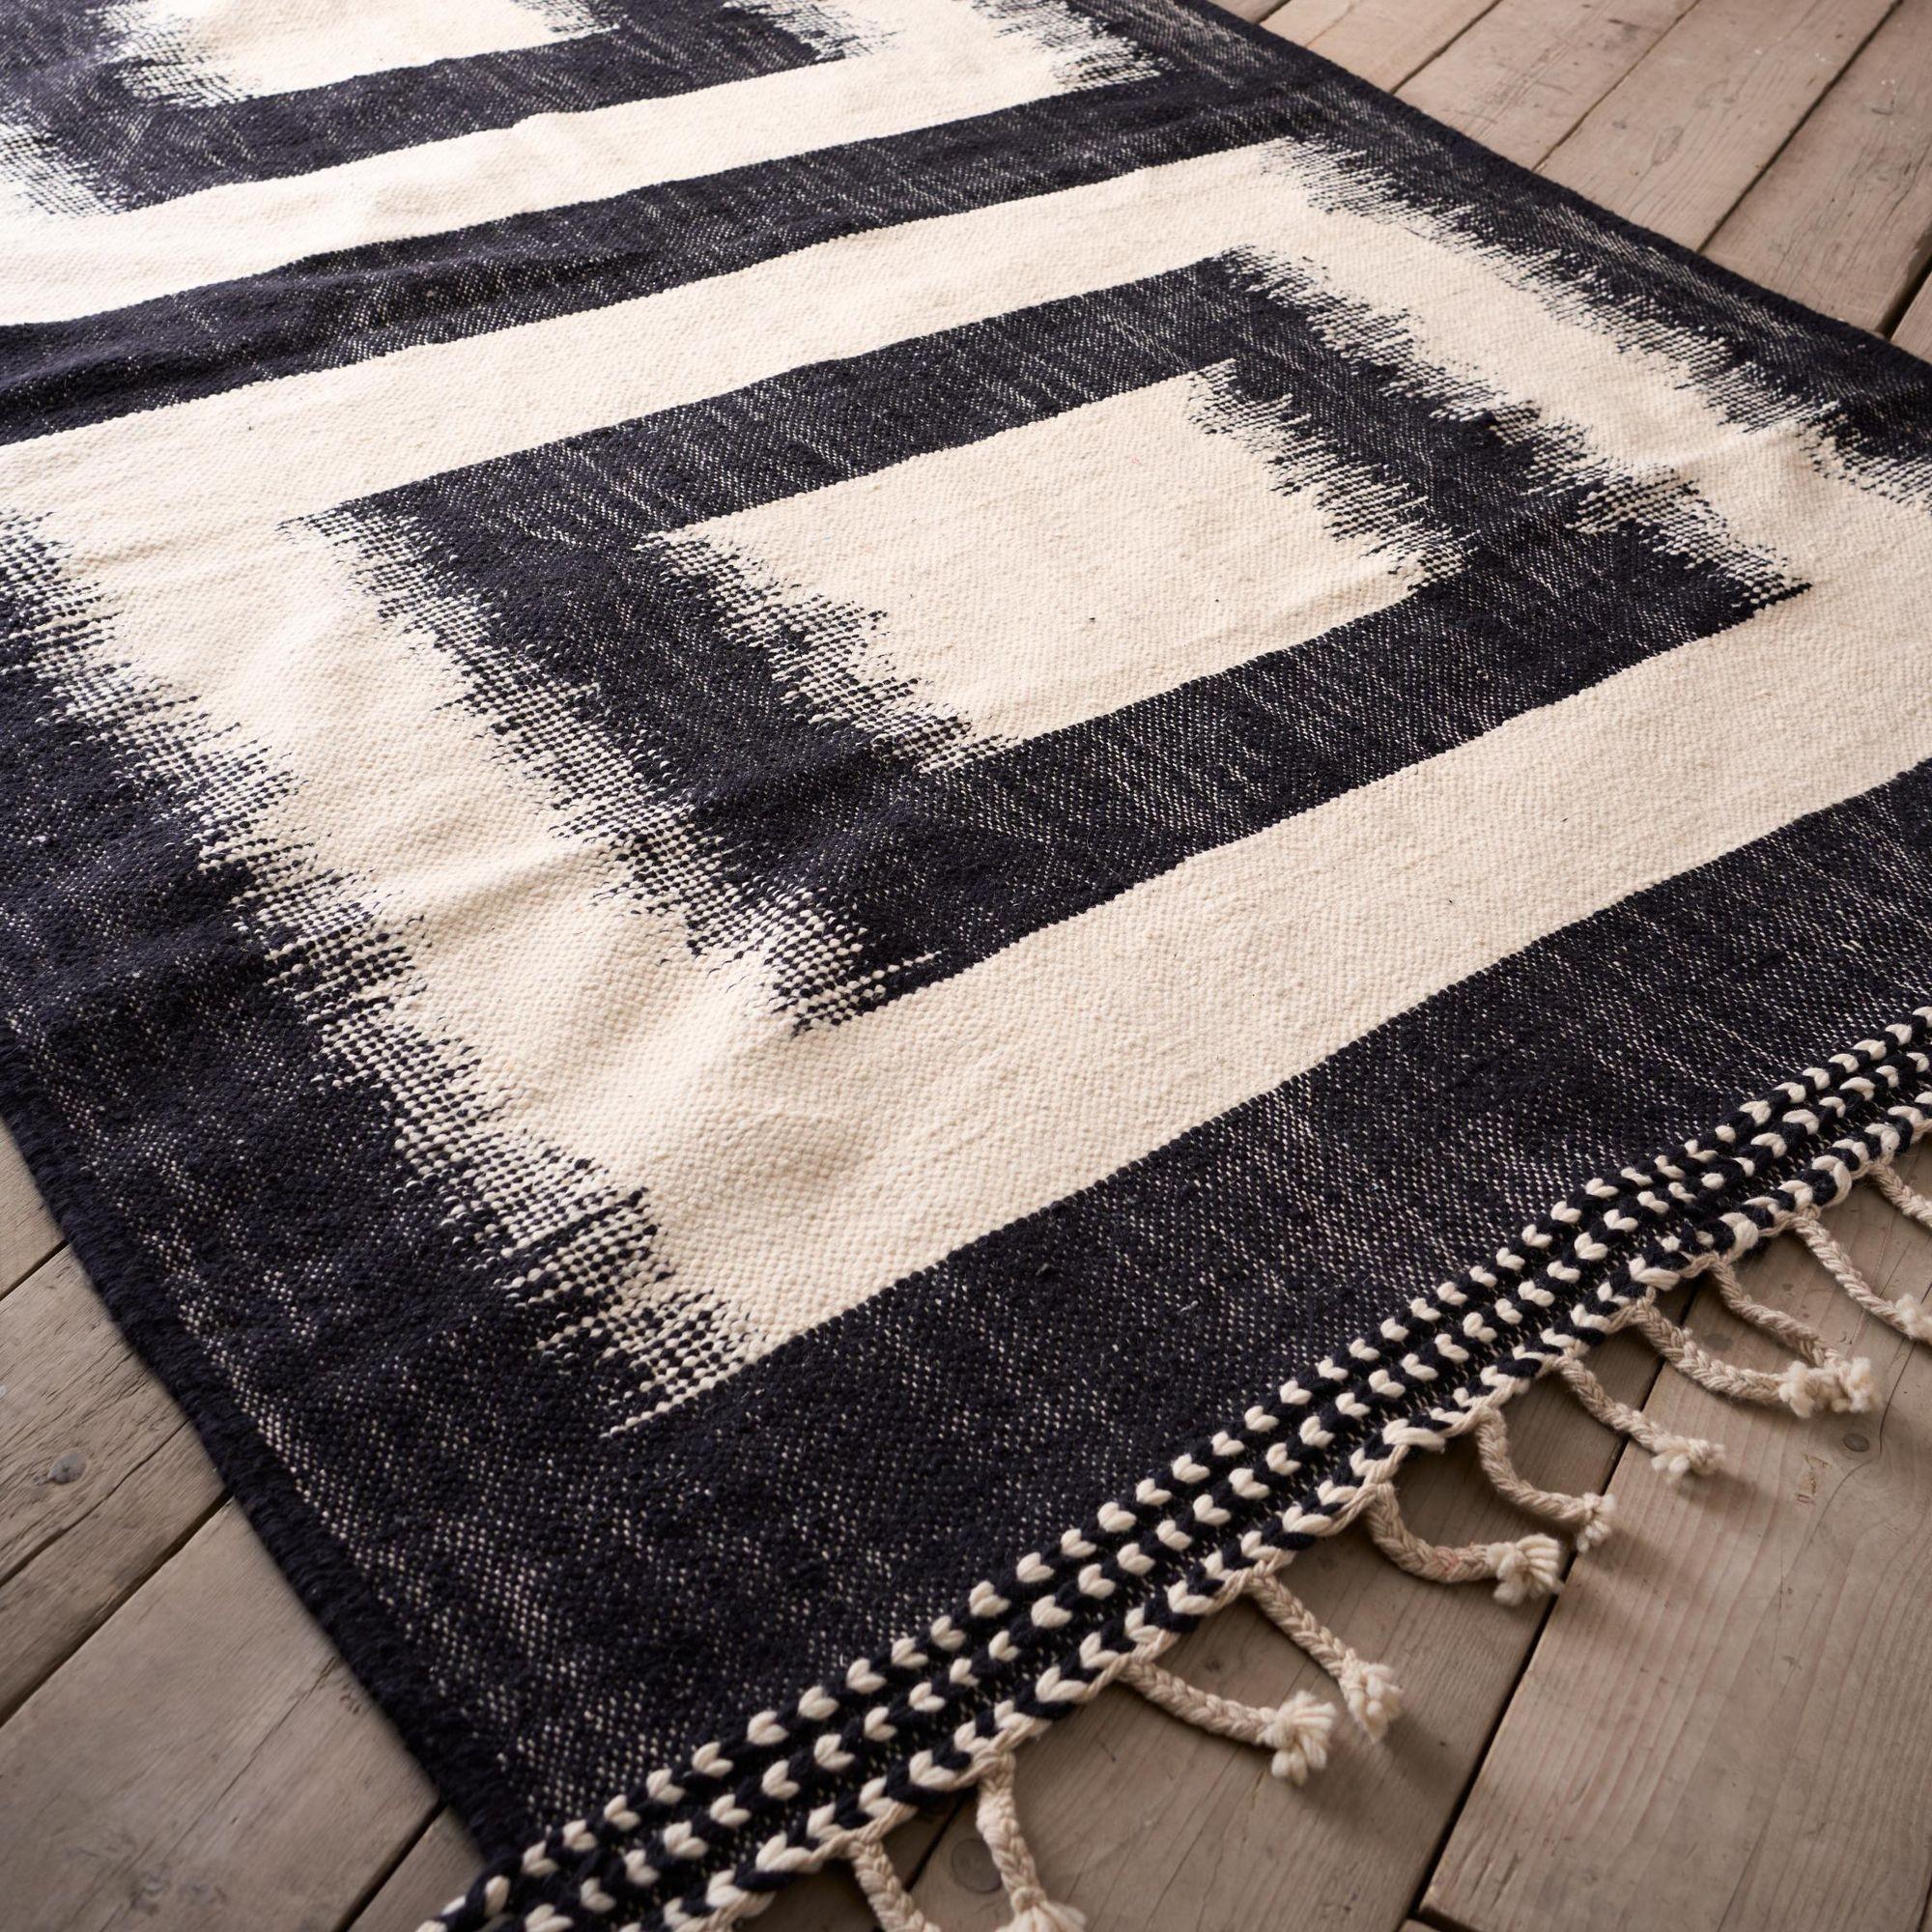 Moroccan rugs have been a popular choice for contemporary interiors for many years. Firstly for their quality but more so for their decorative merit. They have so many different designs and styles you really can create a truly unique space just by